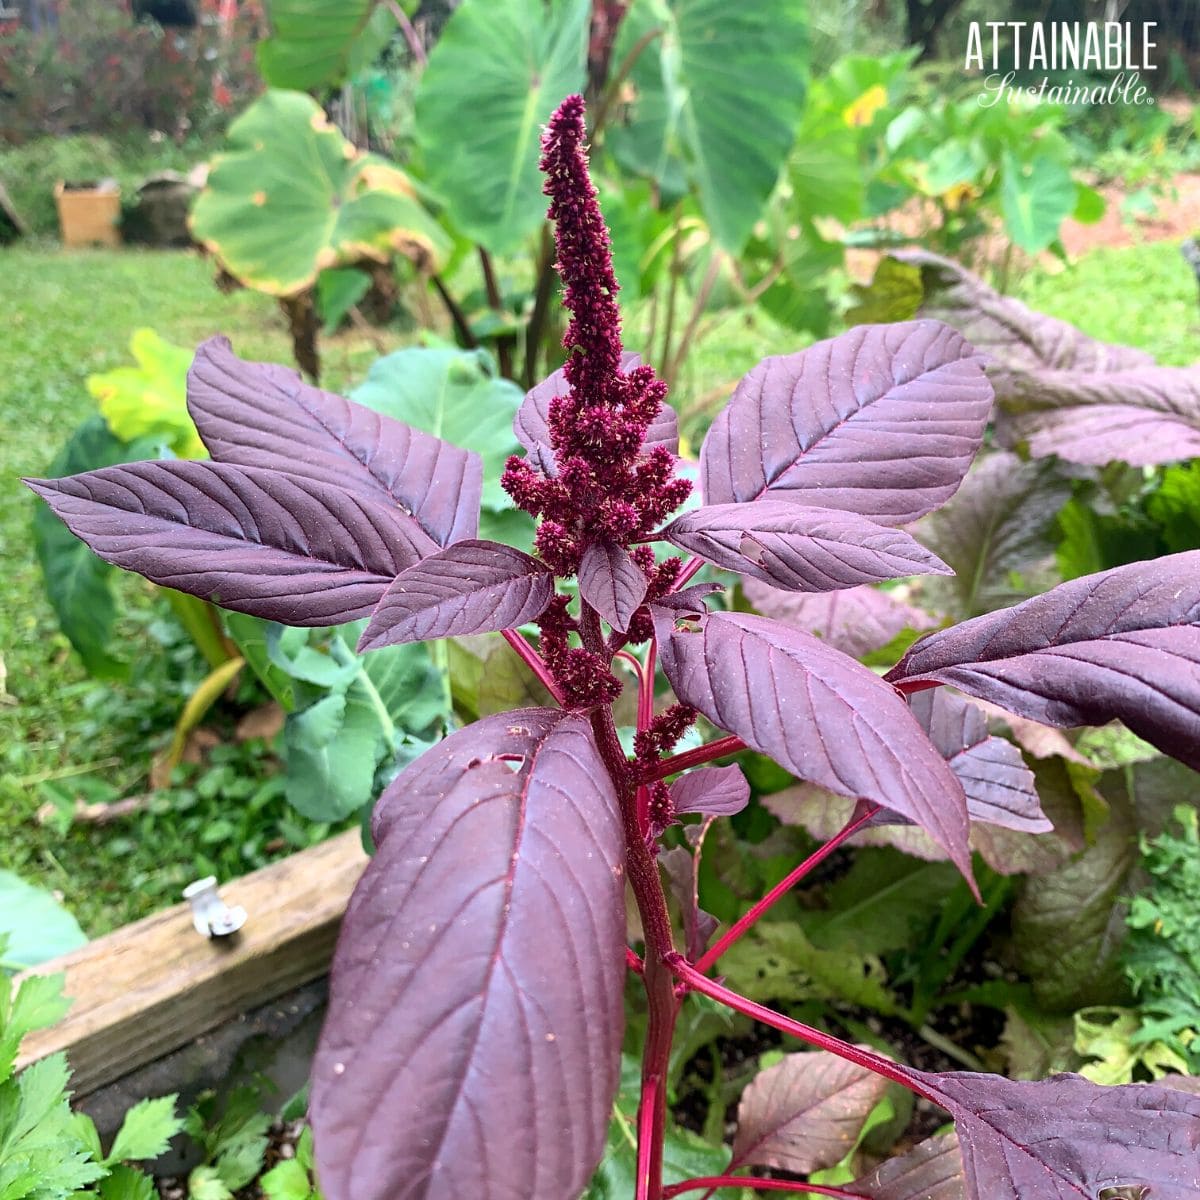 purple leaves and flowers of an amaranth plant.